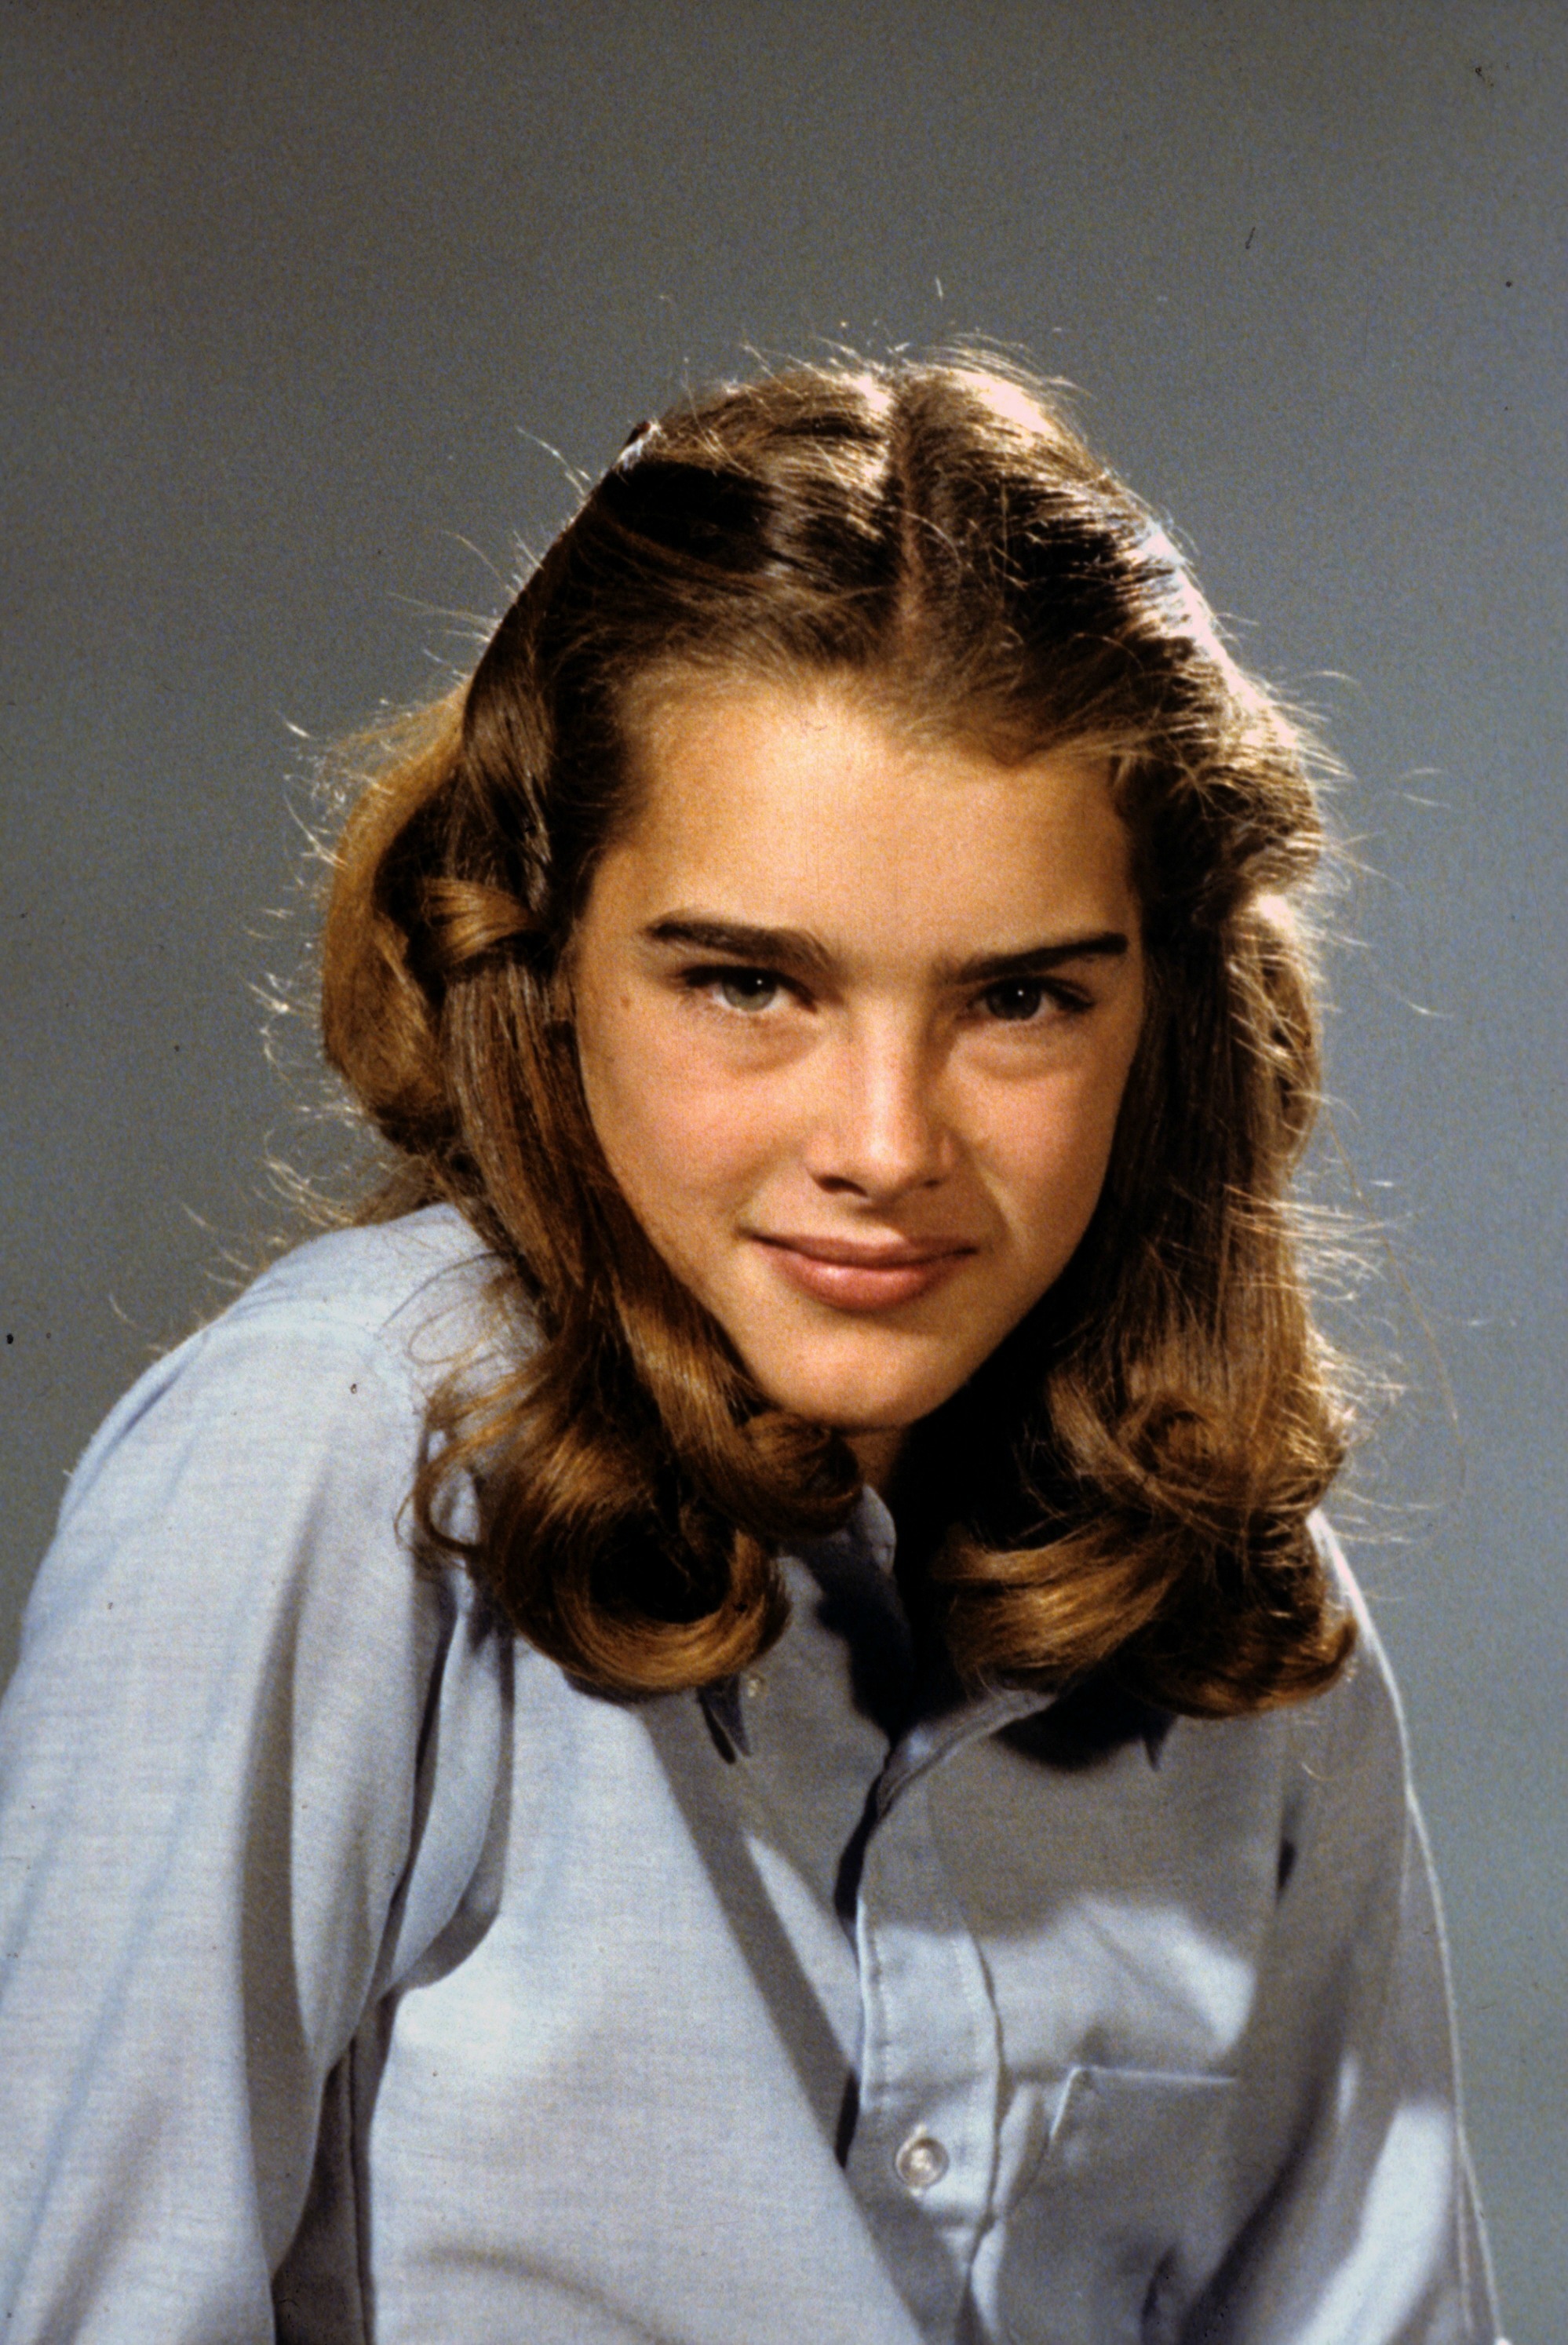 Brooke shields young nudes